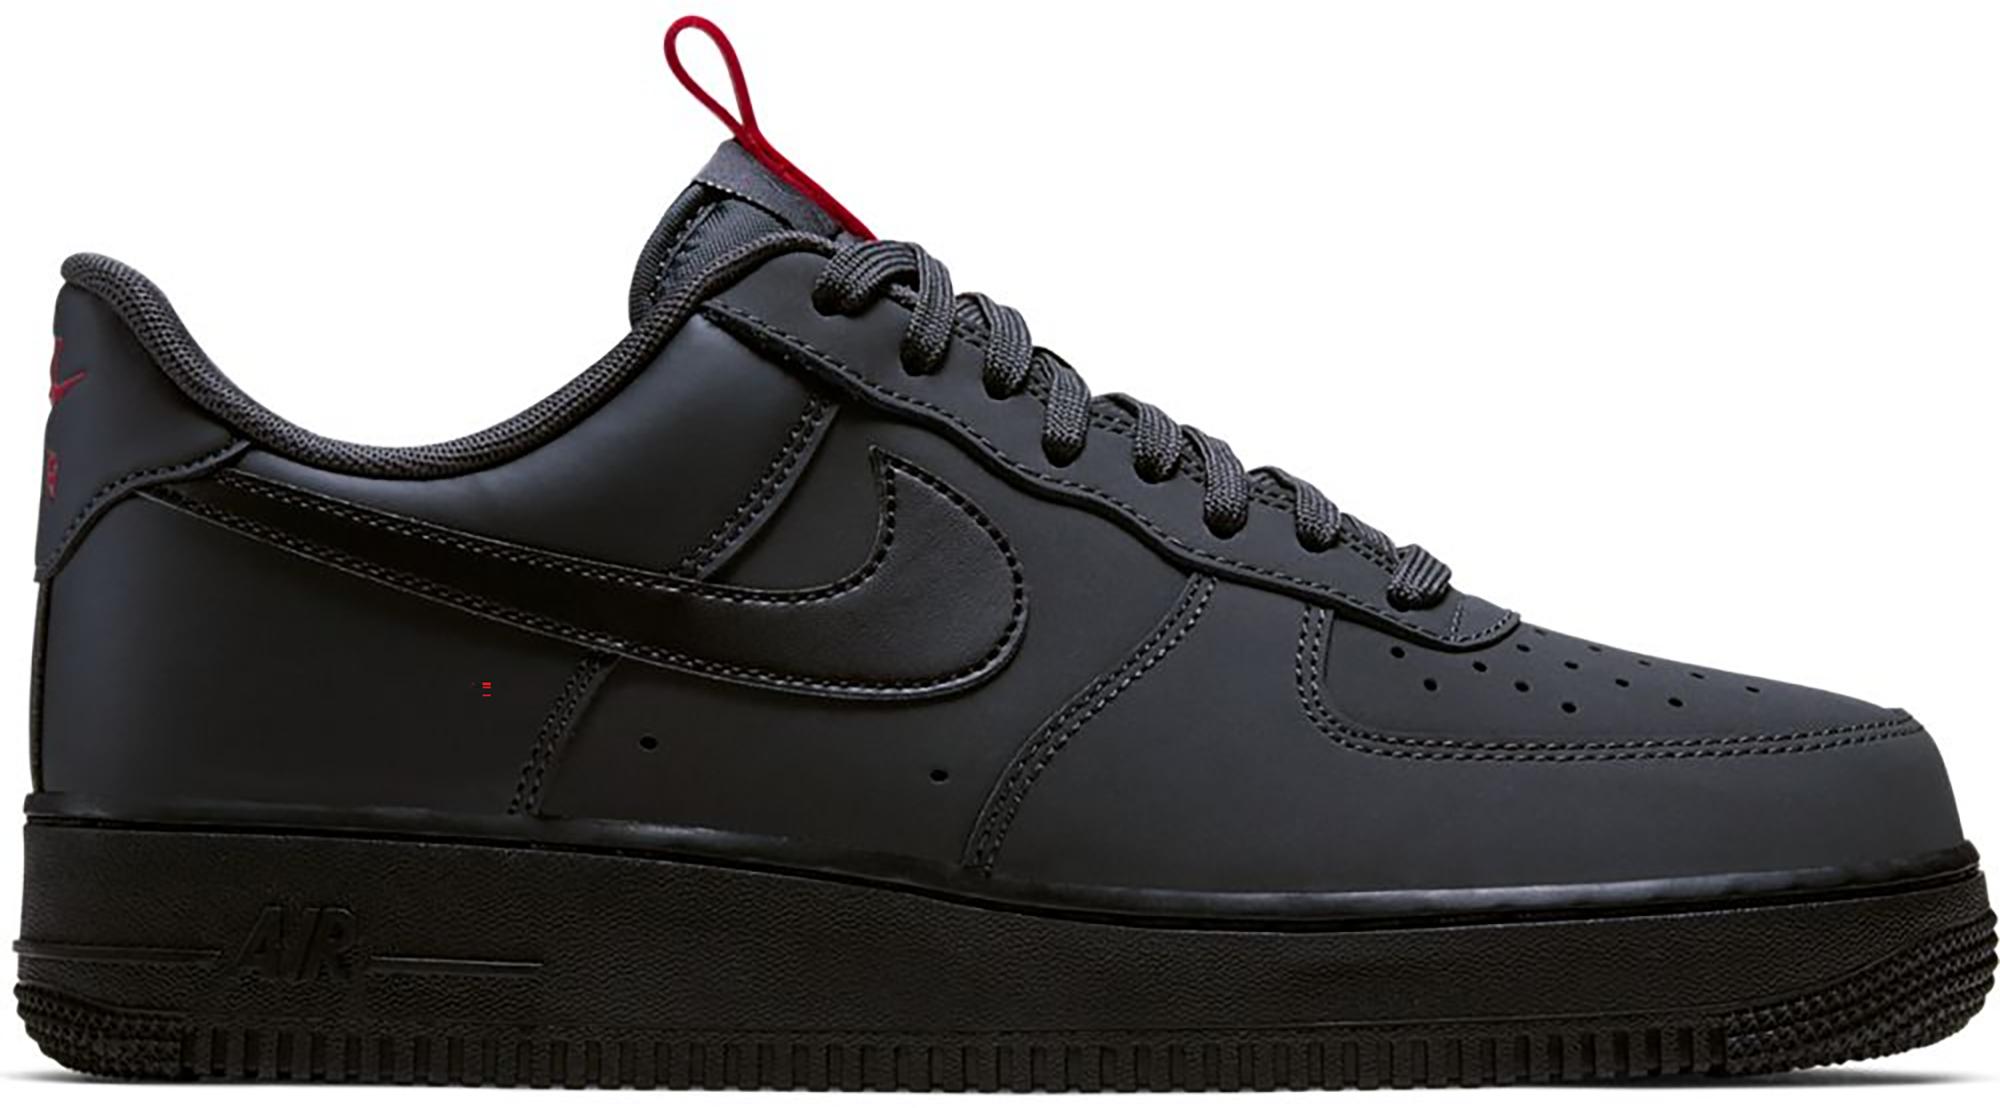 nike air force 1 07 anthracite black university red